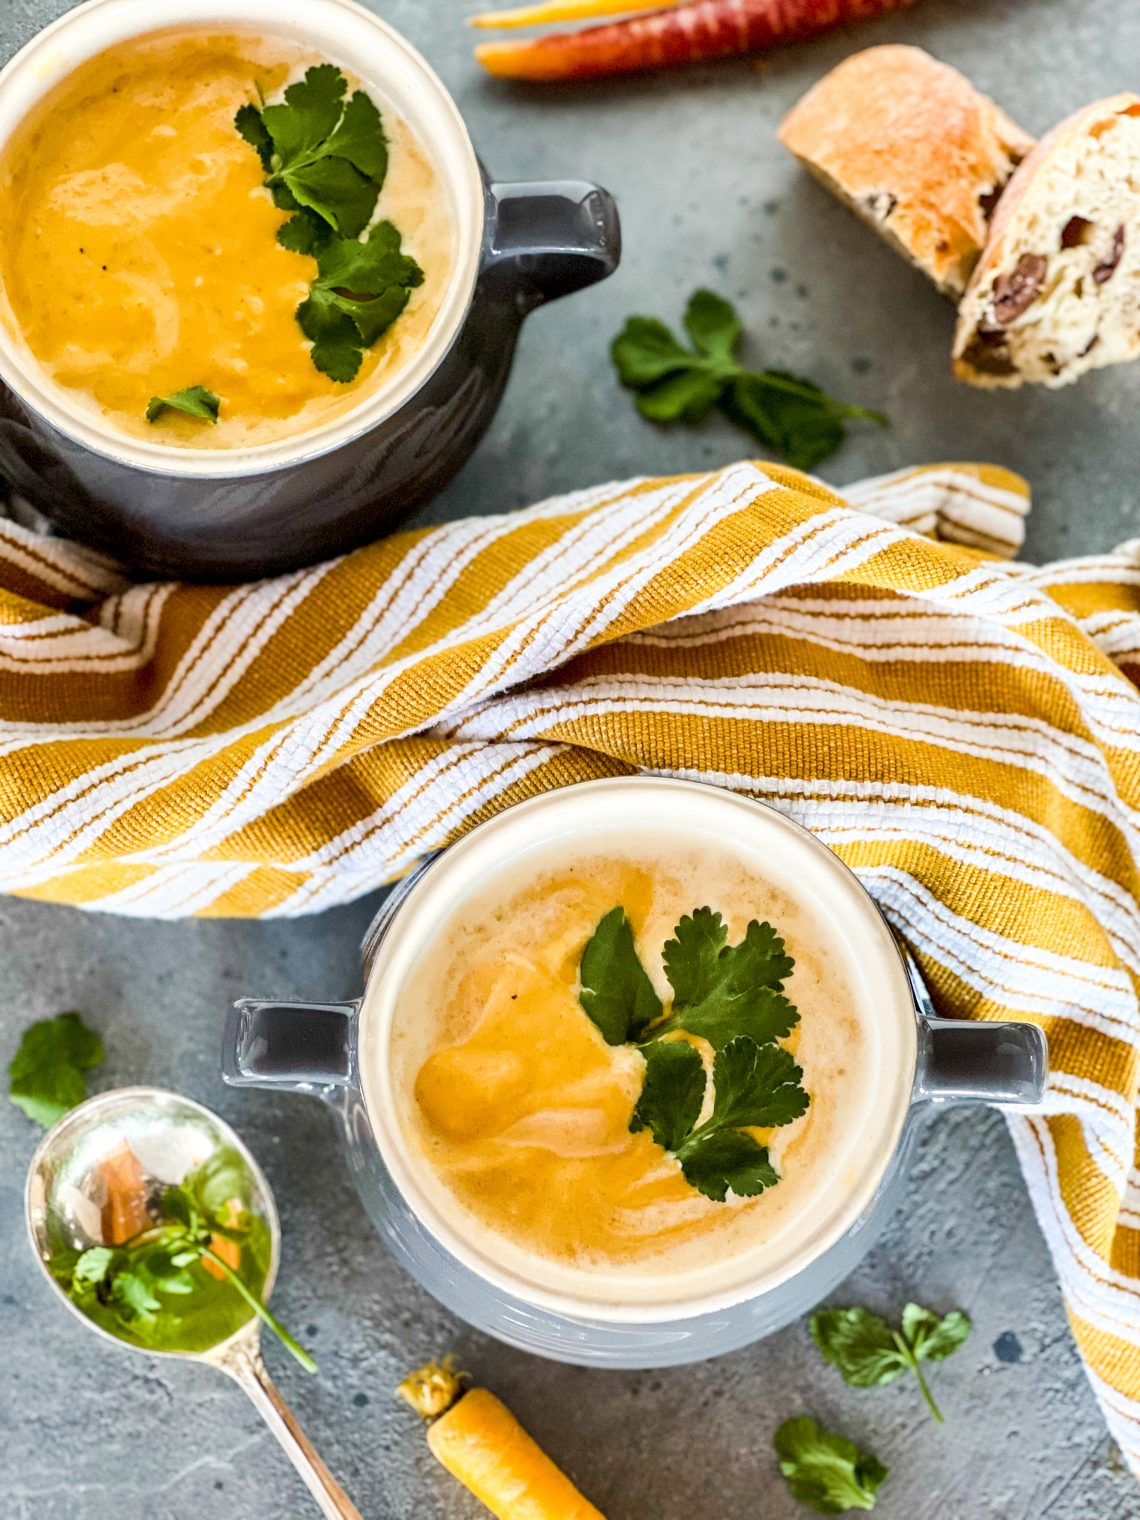 Photograph of Roast Carrot Soup with Ginger, Cumin and Coriander